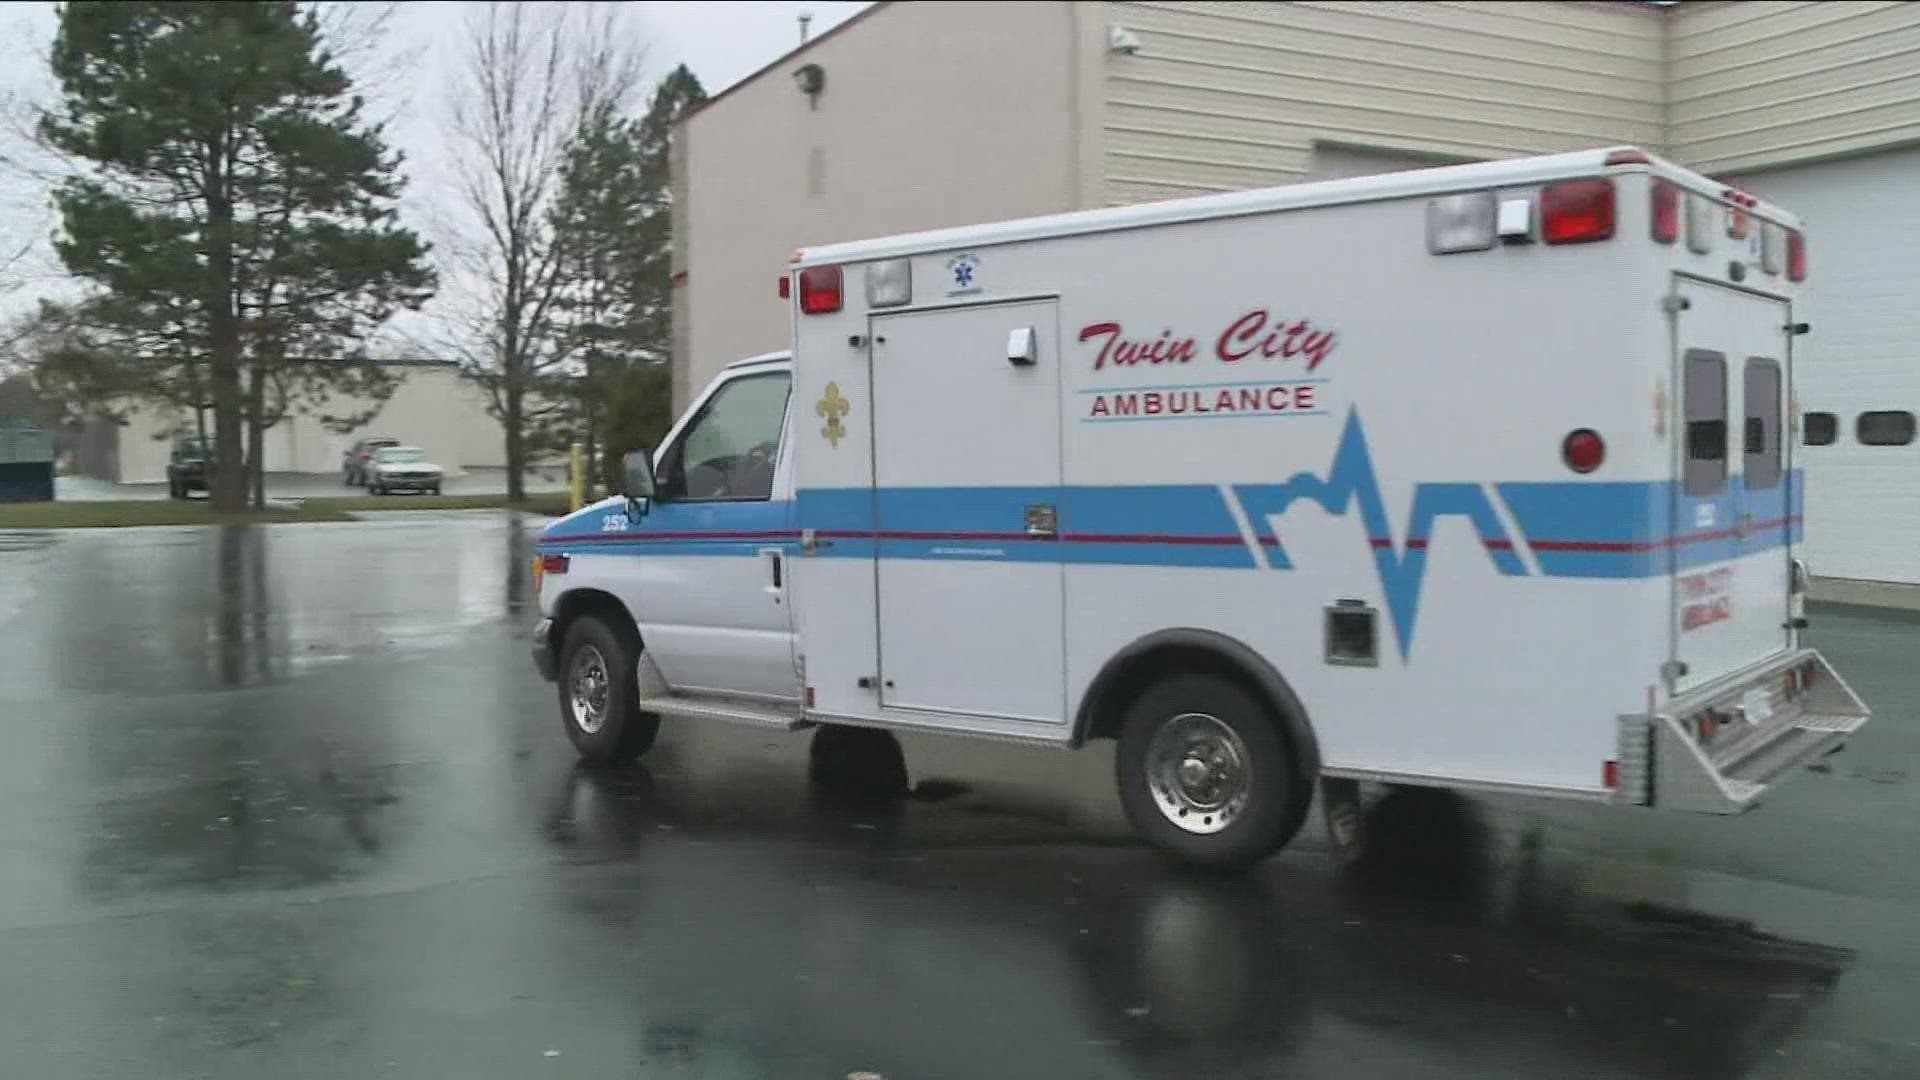 The Twin Cities Ambulance contract with Lockport expires in January and the company says it doesn't have the personnel to renew the agreement.